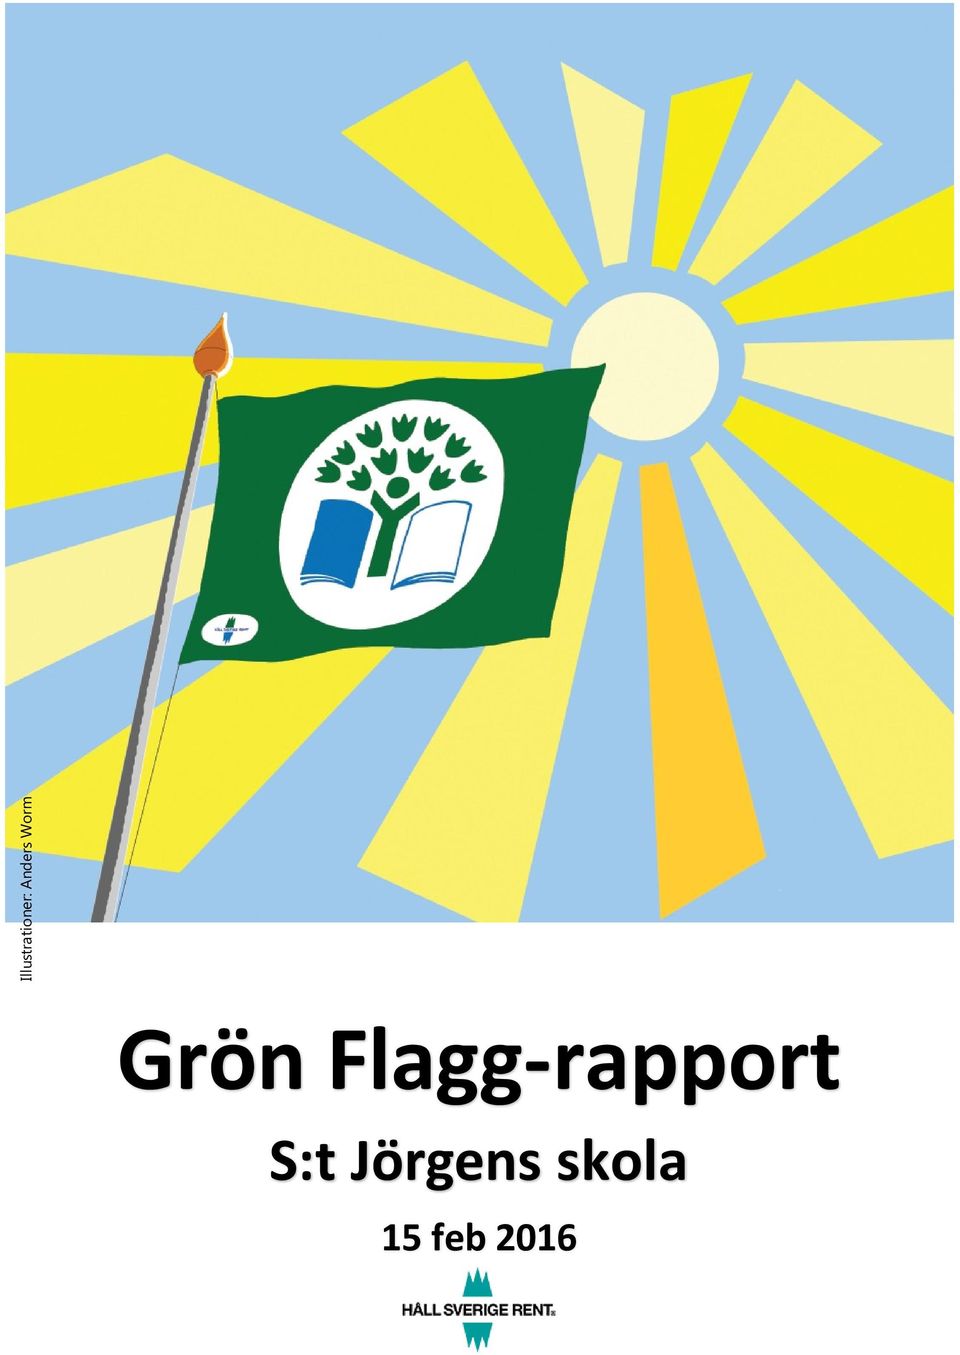 Flagg-rapport S:t